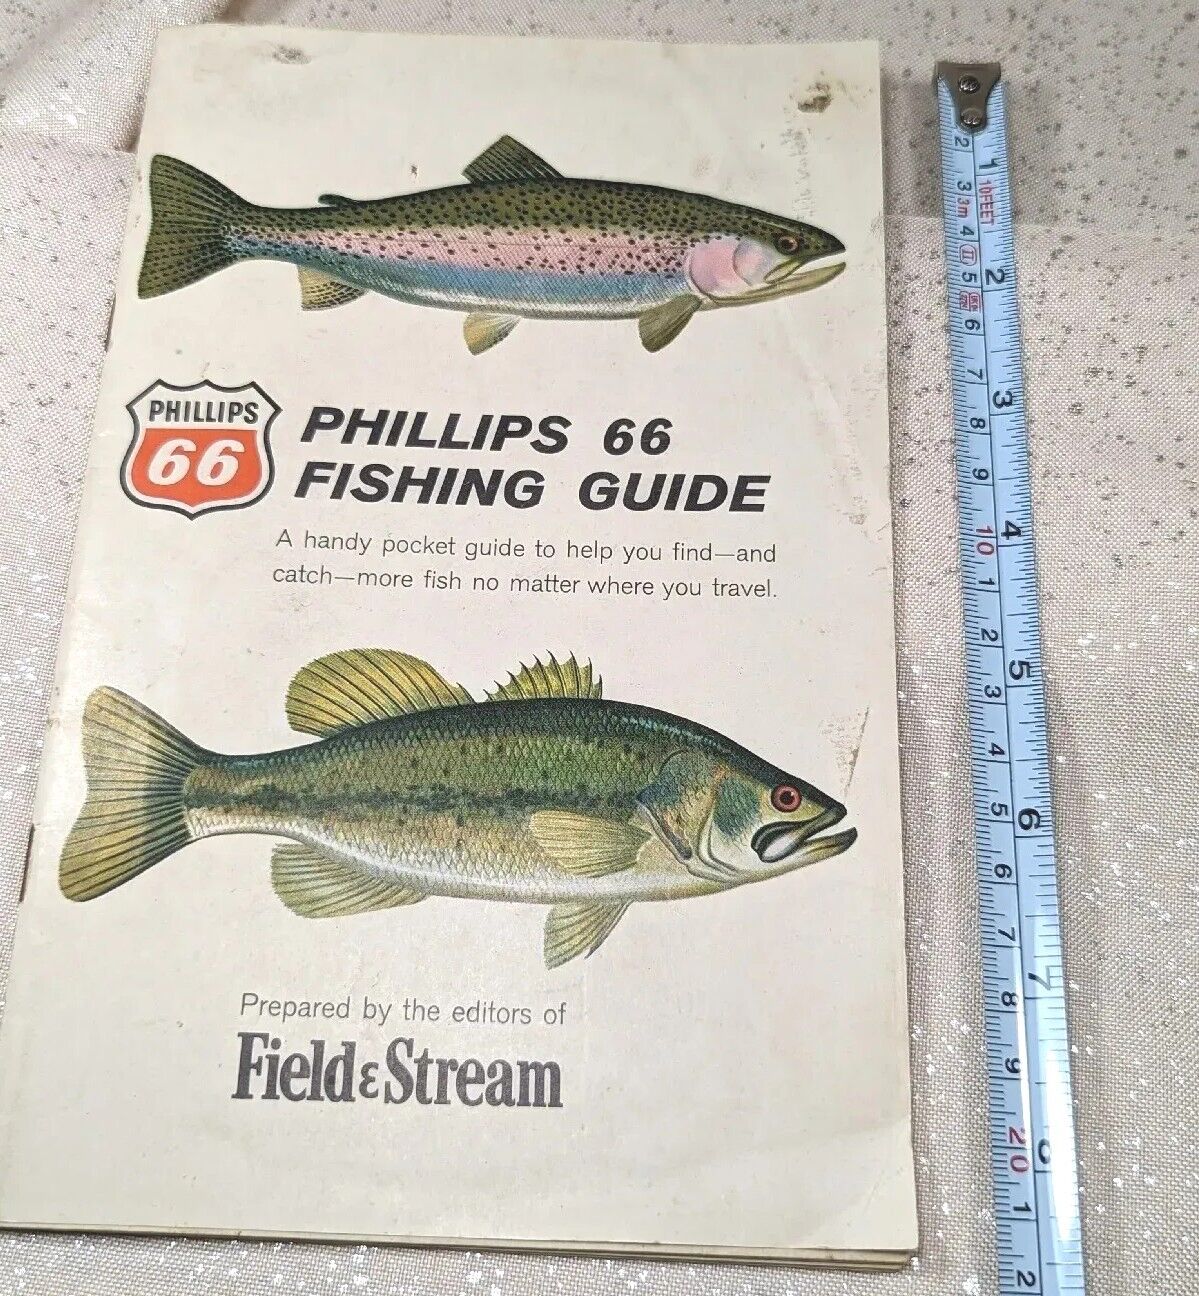 Rare VINTAGE PHILLIPS 66 FISHING GUIDE 1960s Field & Stream Ad Collectible 